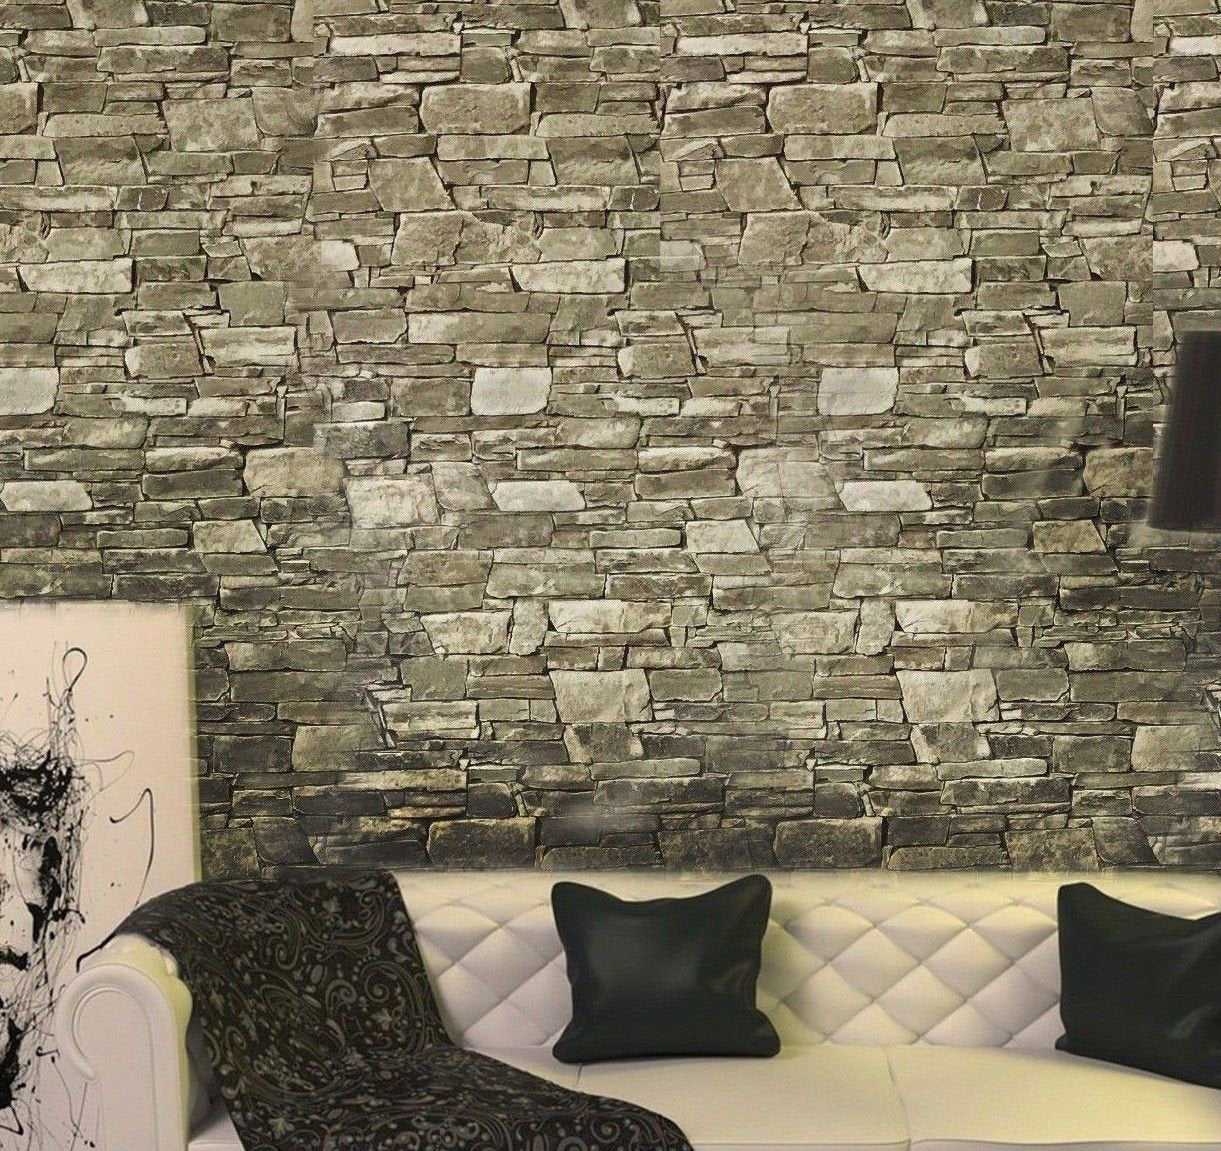 HaokHome H1096 Faux Brick Wallpaper Peel & Stick Wall Murals Grey 17.7x  19.7ft Prepasted Contact Paper price in UAE | Amazon UAE | kanbkam